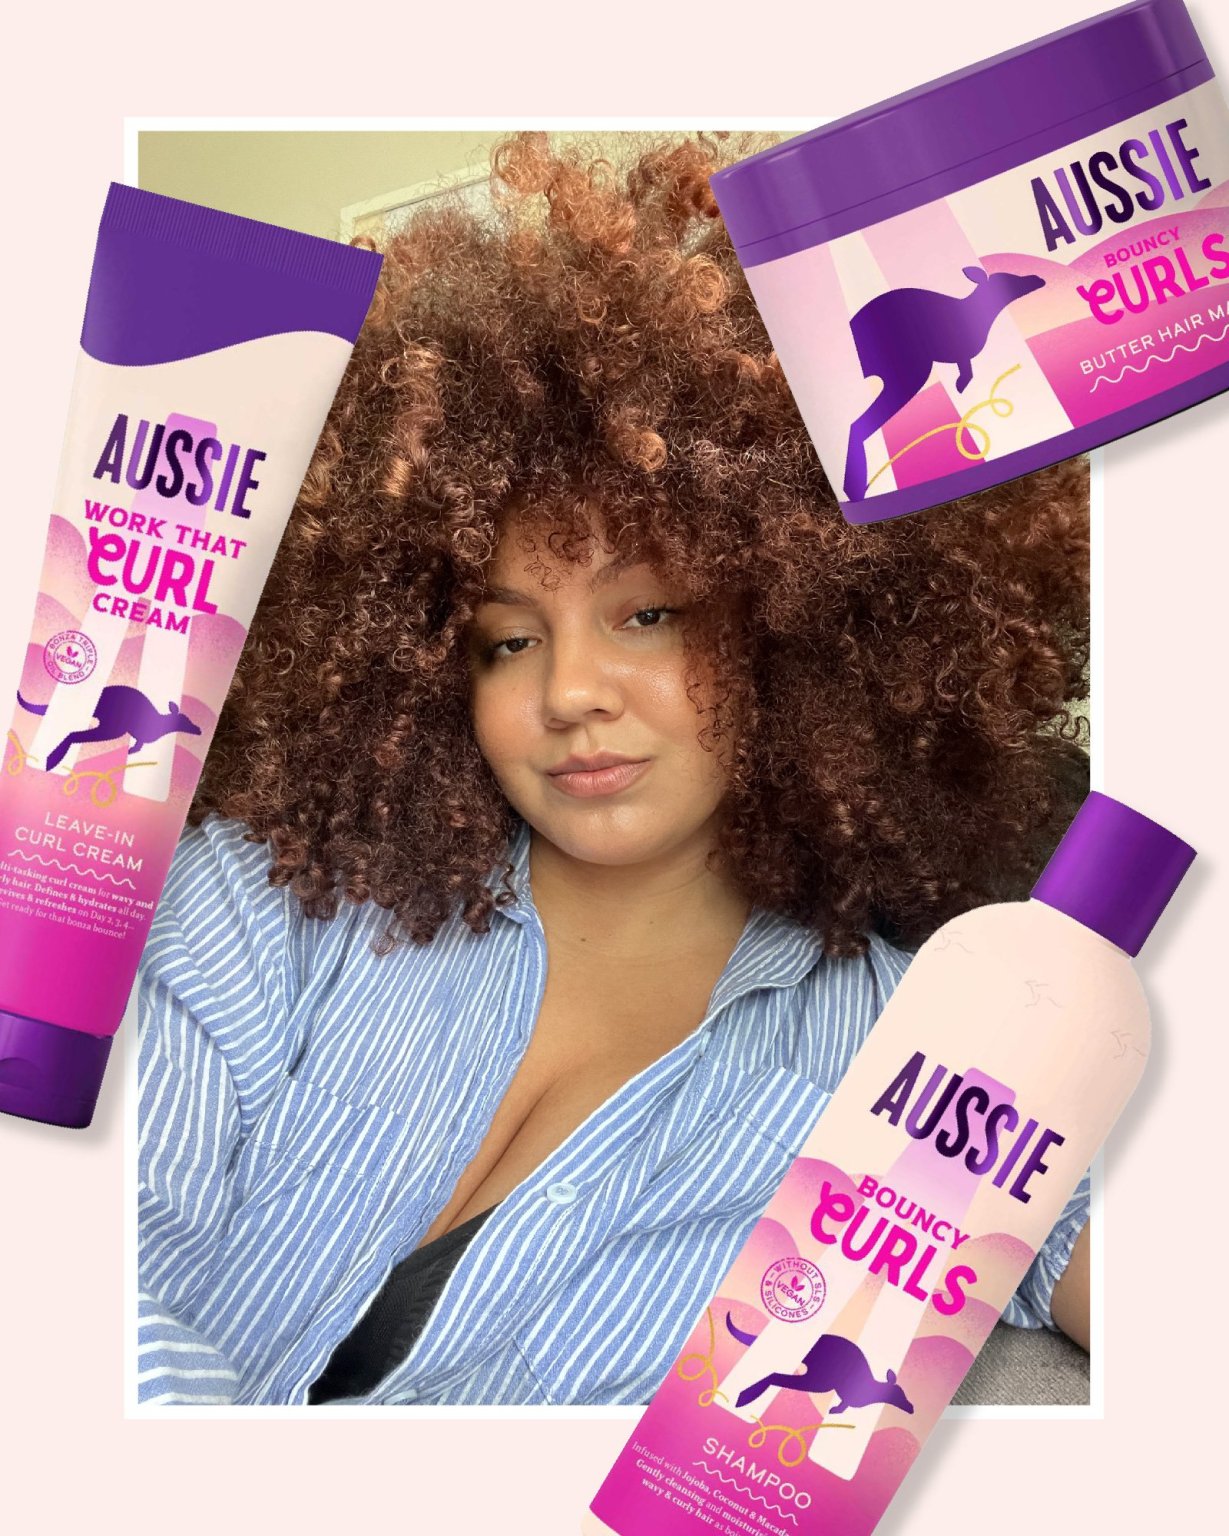 Bounce Curl! Worth the hype?? Curly Hair Product Review + Tutorial